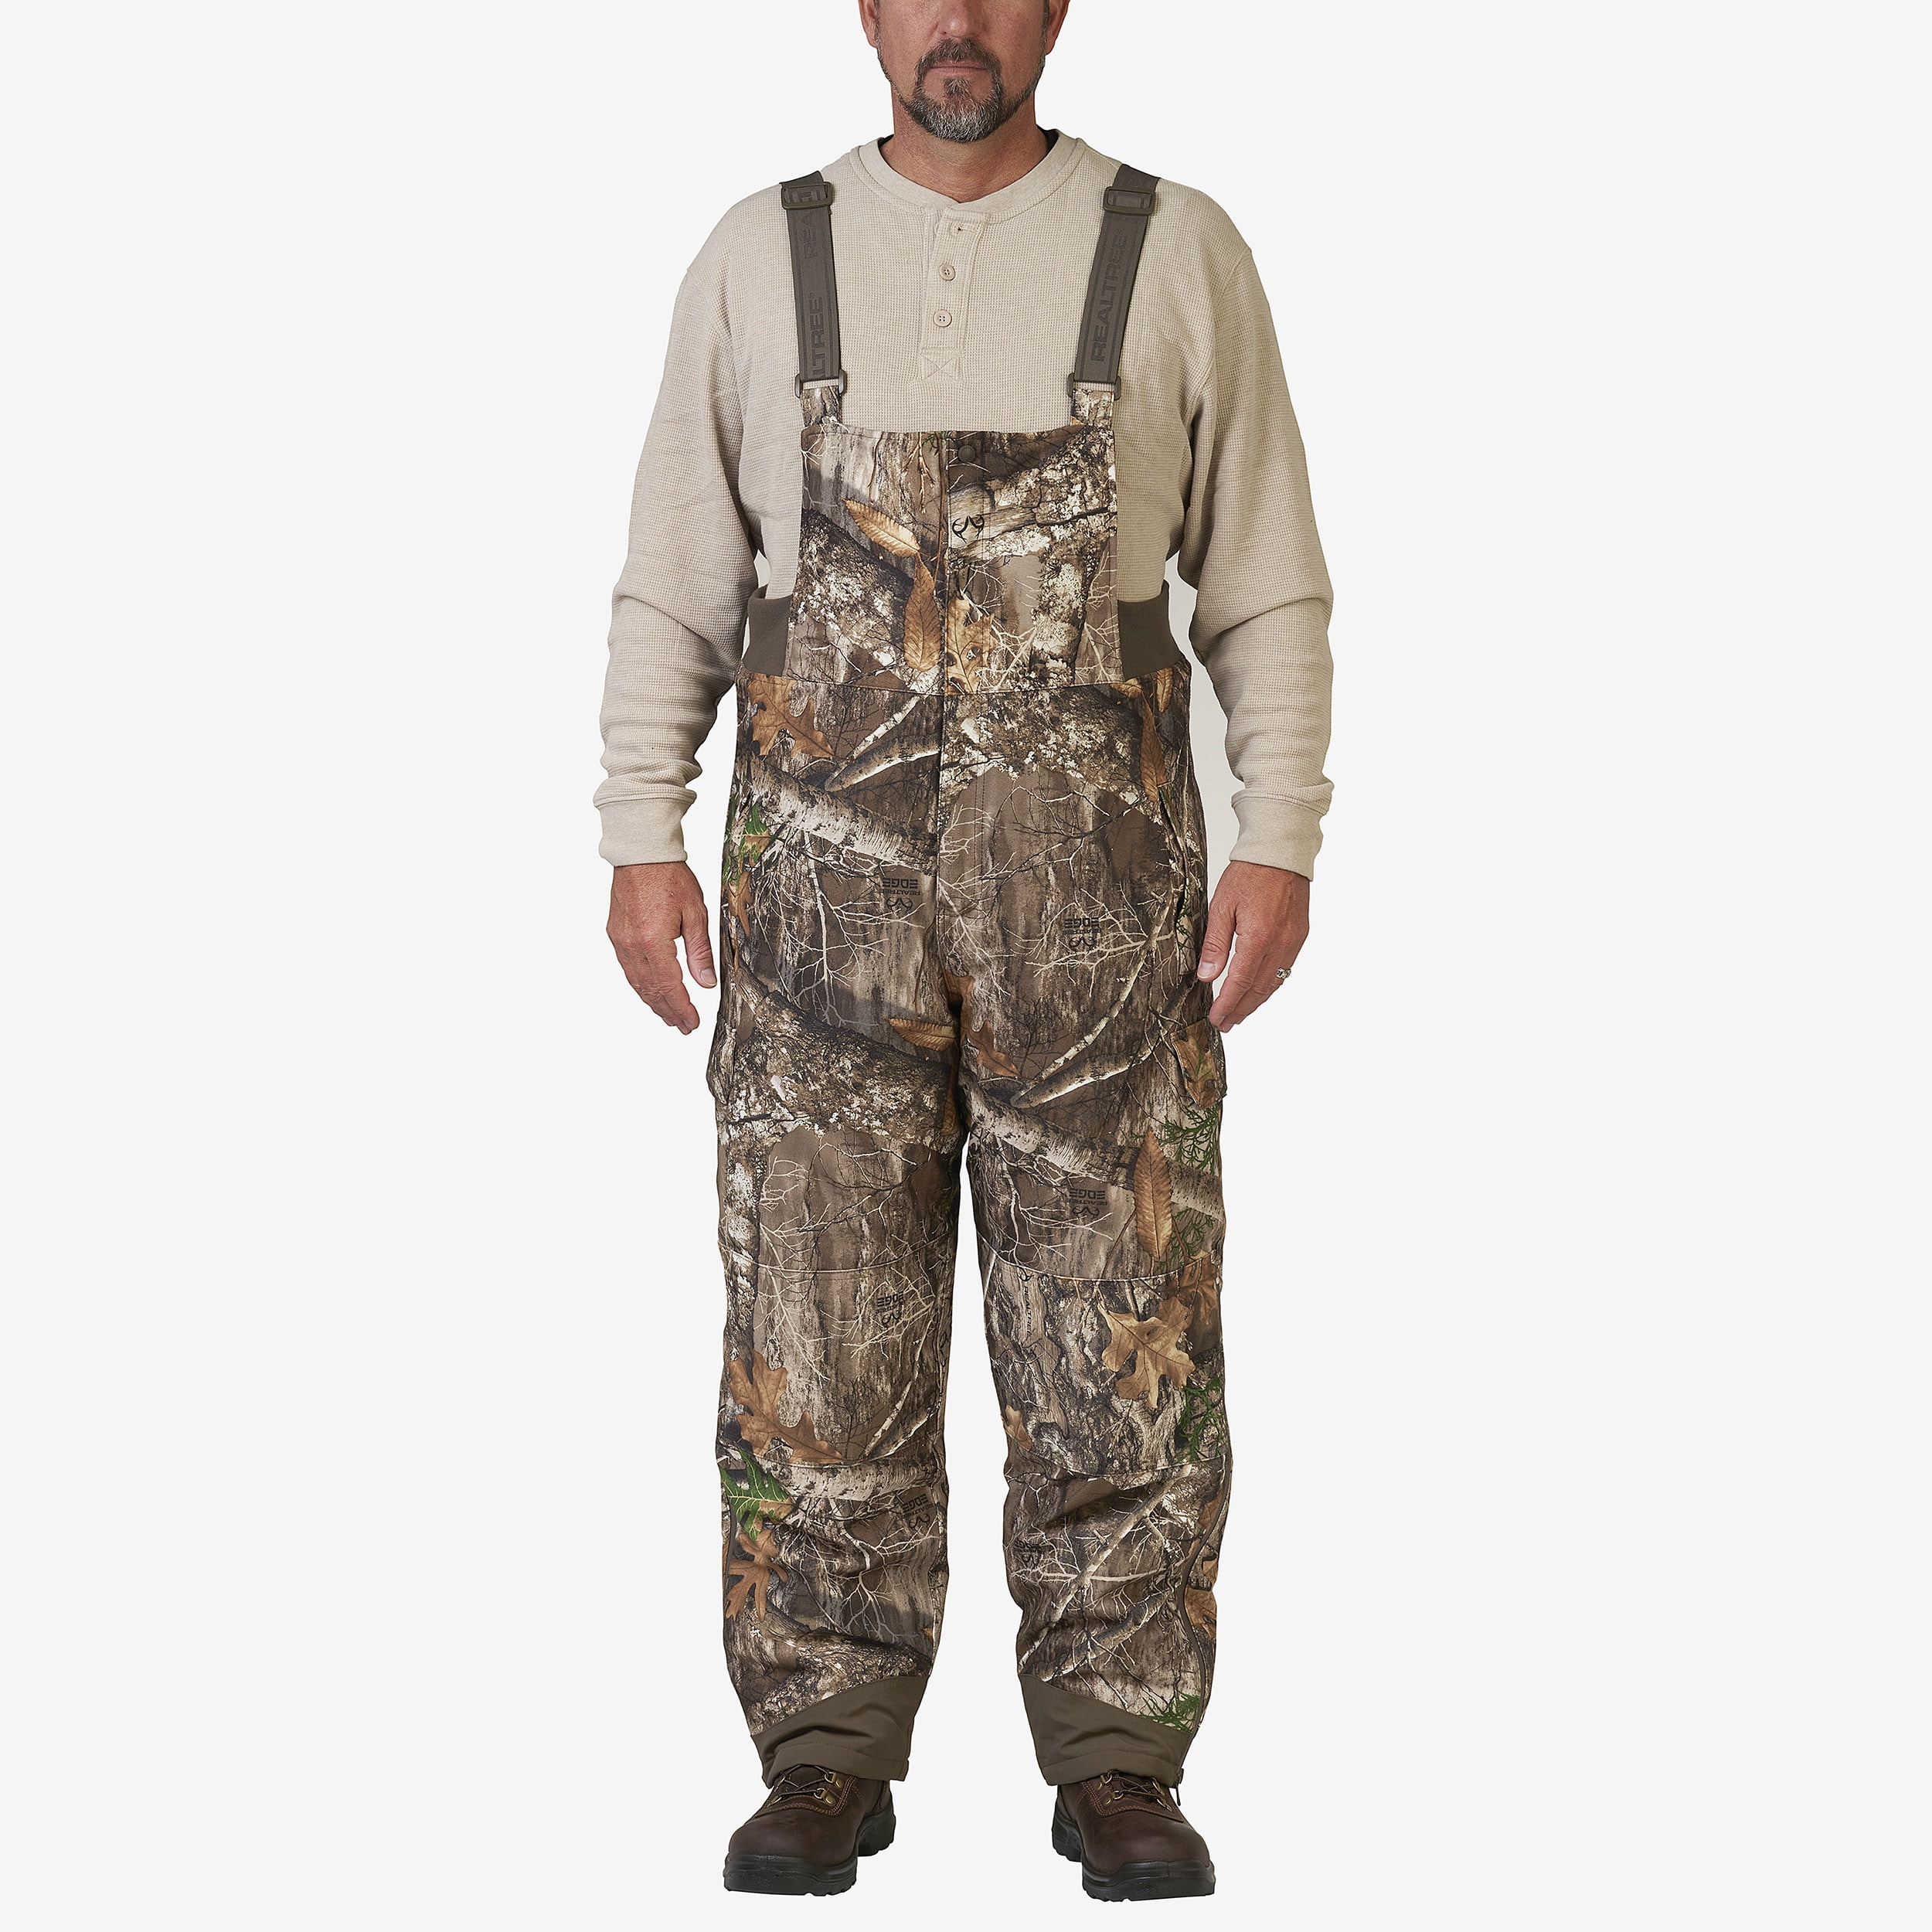 Realtree Edge Men's Insulated Hunting Bib Overalls, up to Size 3XL ...